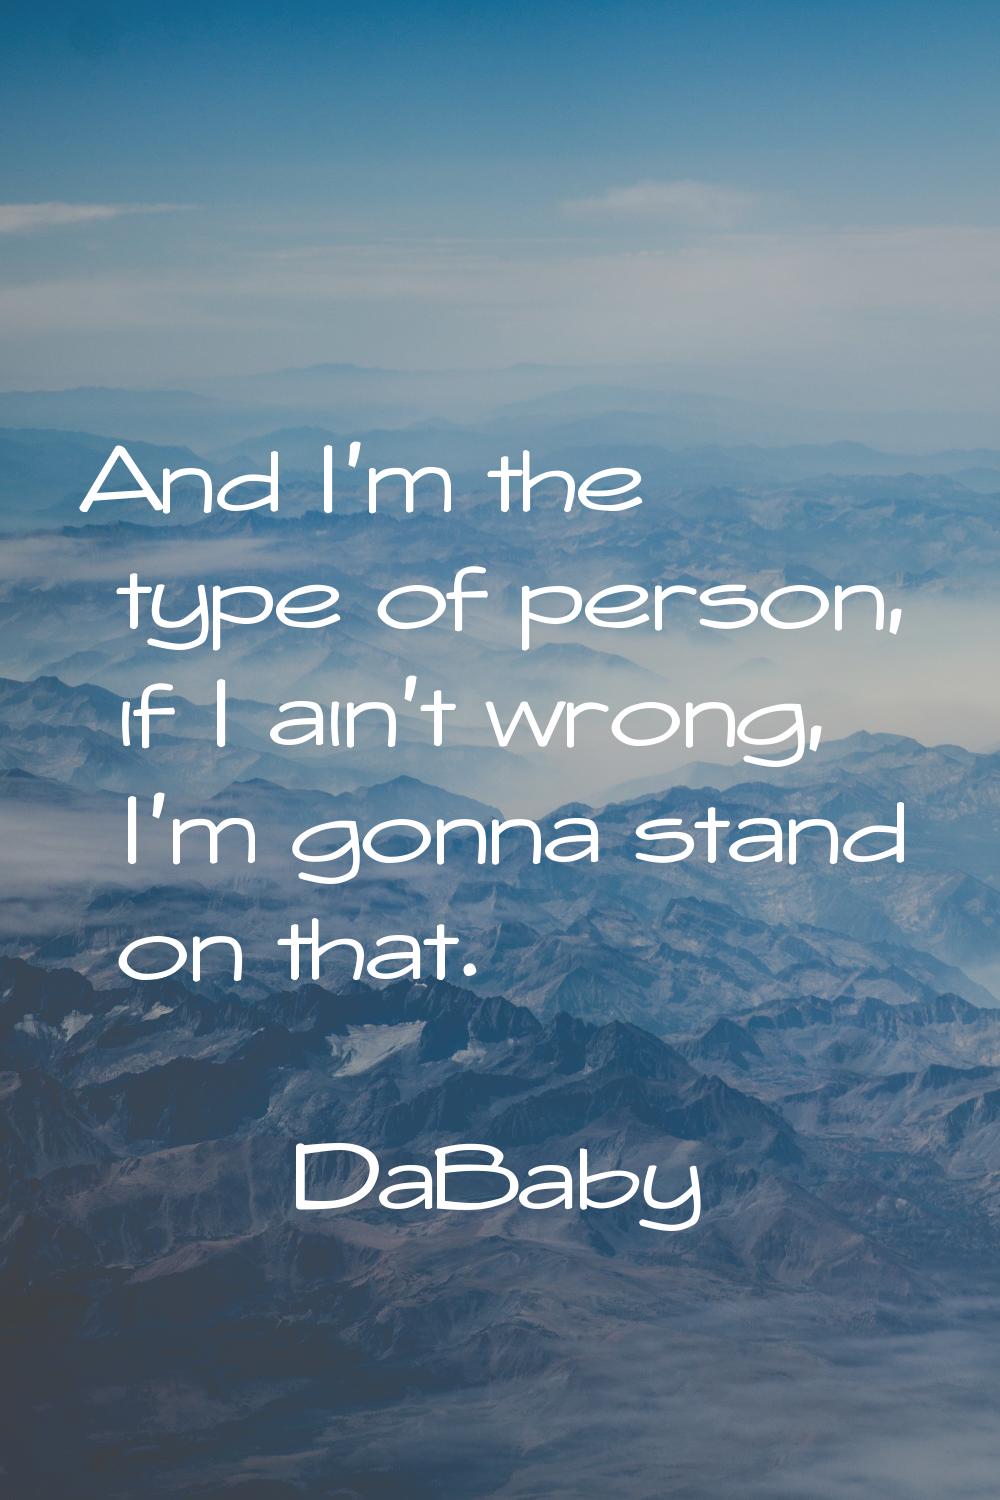 And I'm the type of person, if I ain't wrong, I'm gonna stand on that.